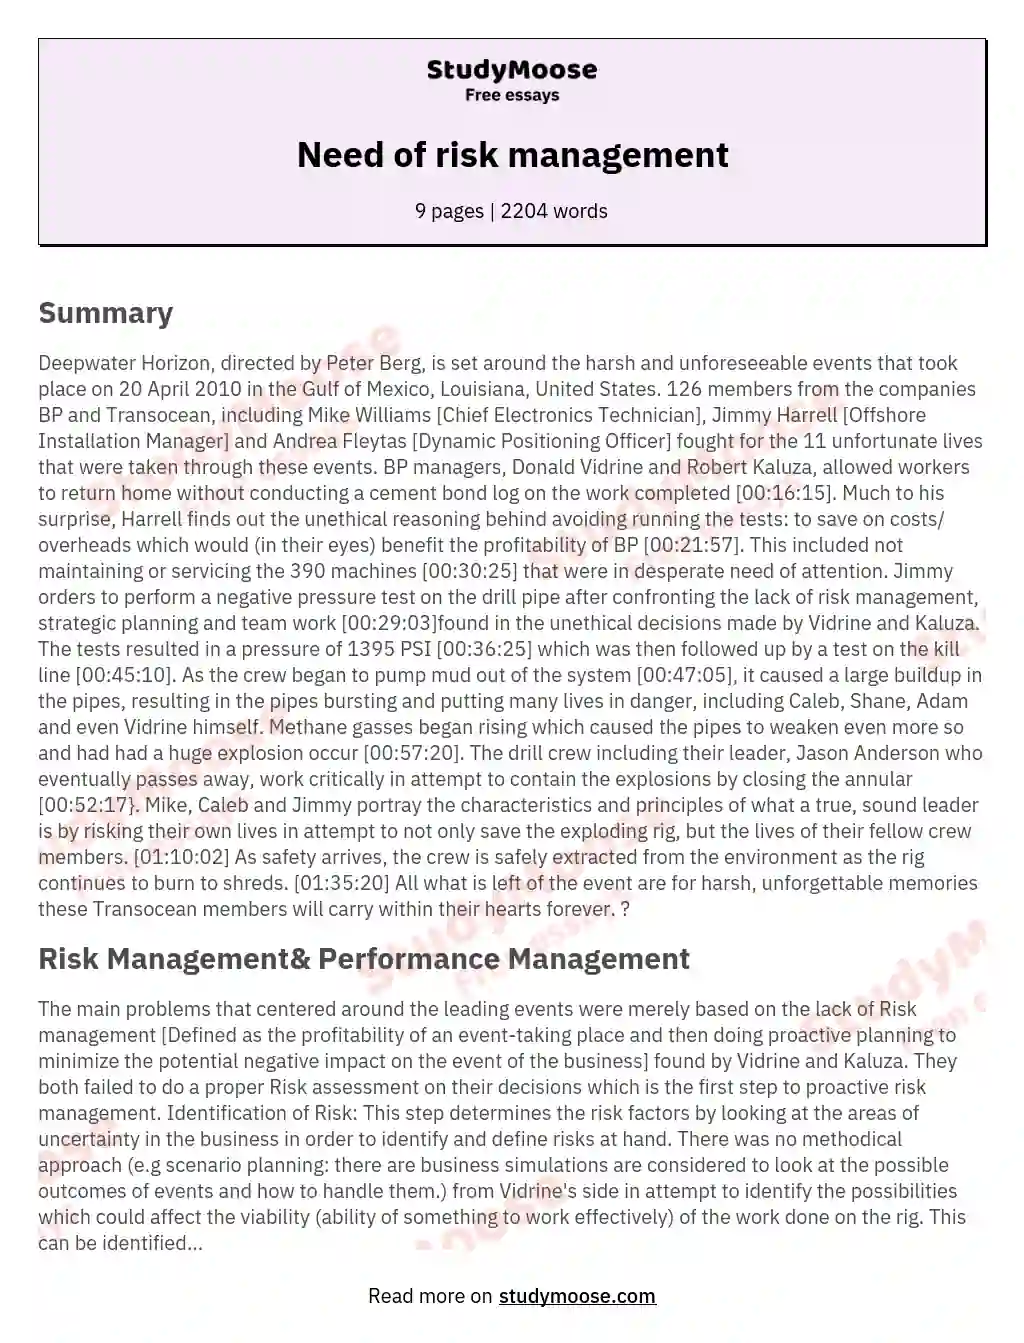 Need of risk management essay